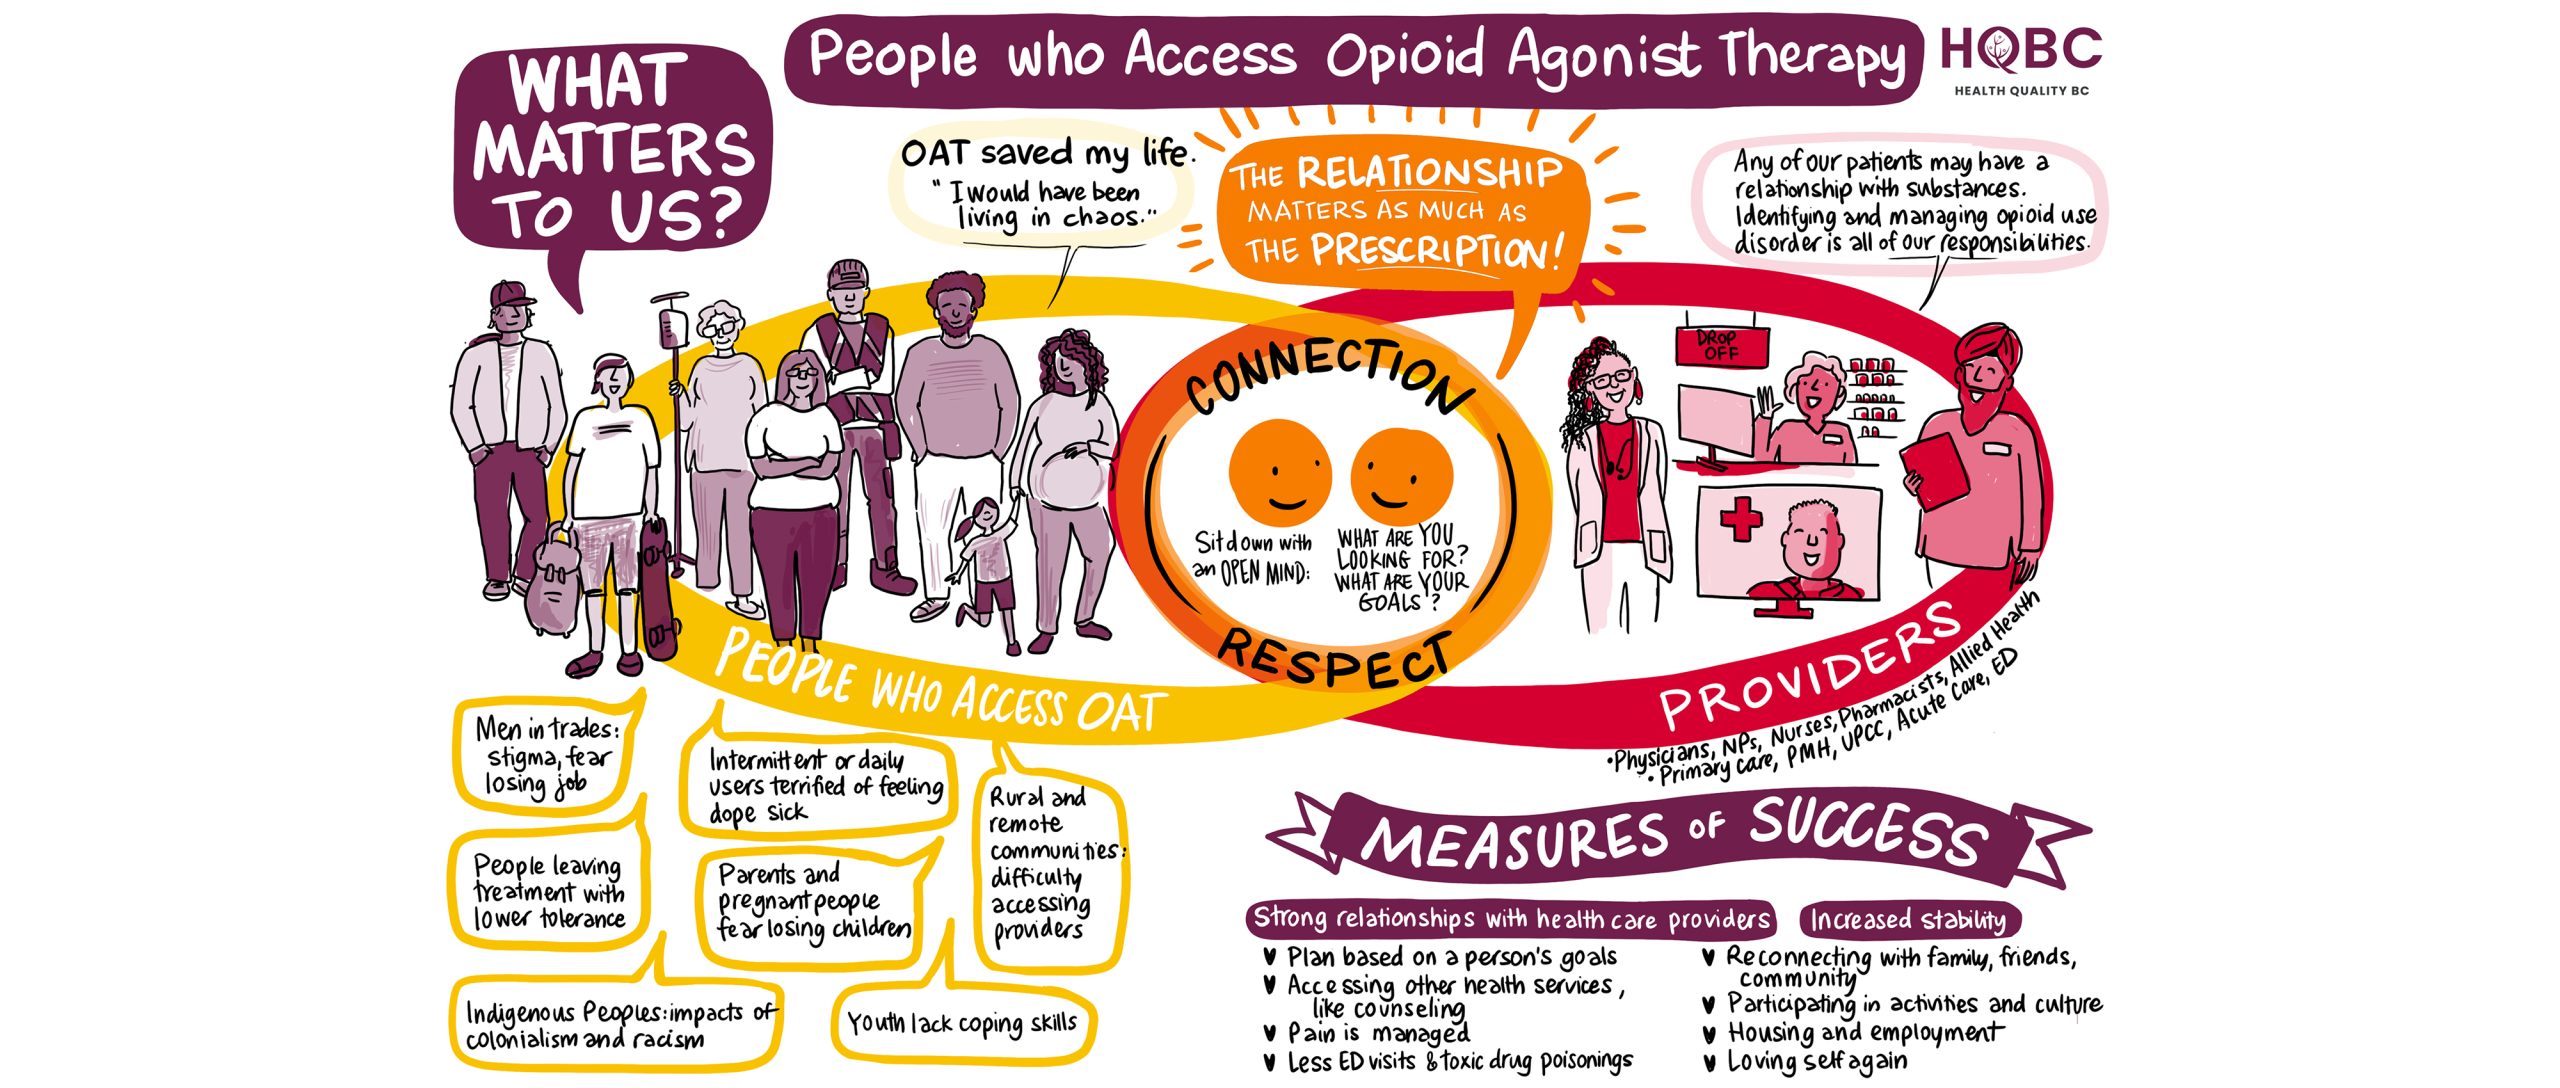 illustrated journey map about accessing and delivering opioid agonist treatment (OAT) in BC, illustrated by drawing change sam bradd - PWLLE perspectives